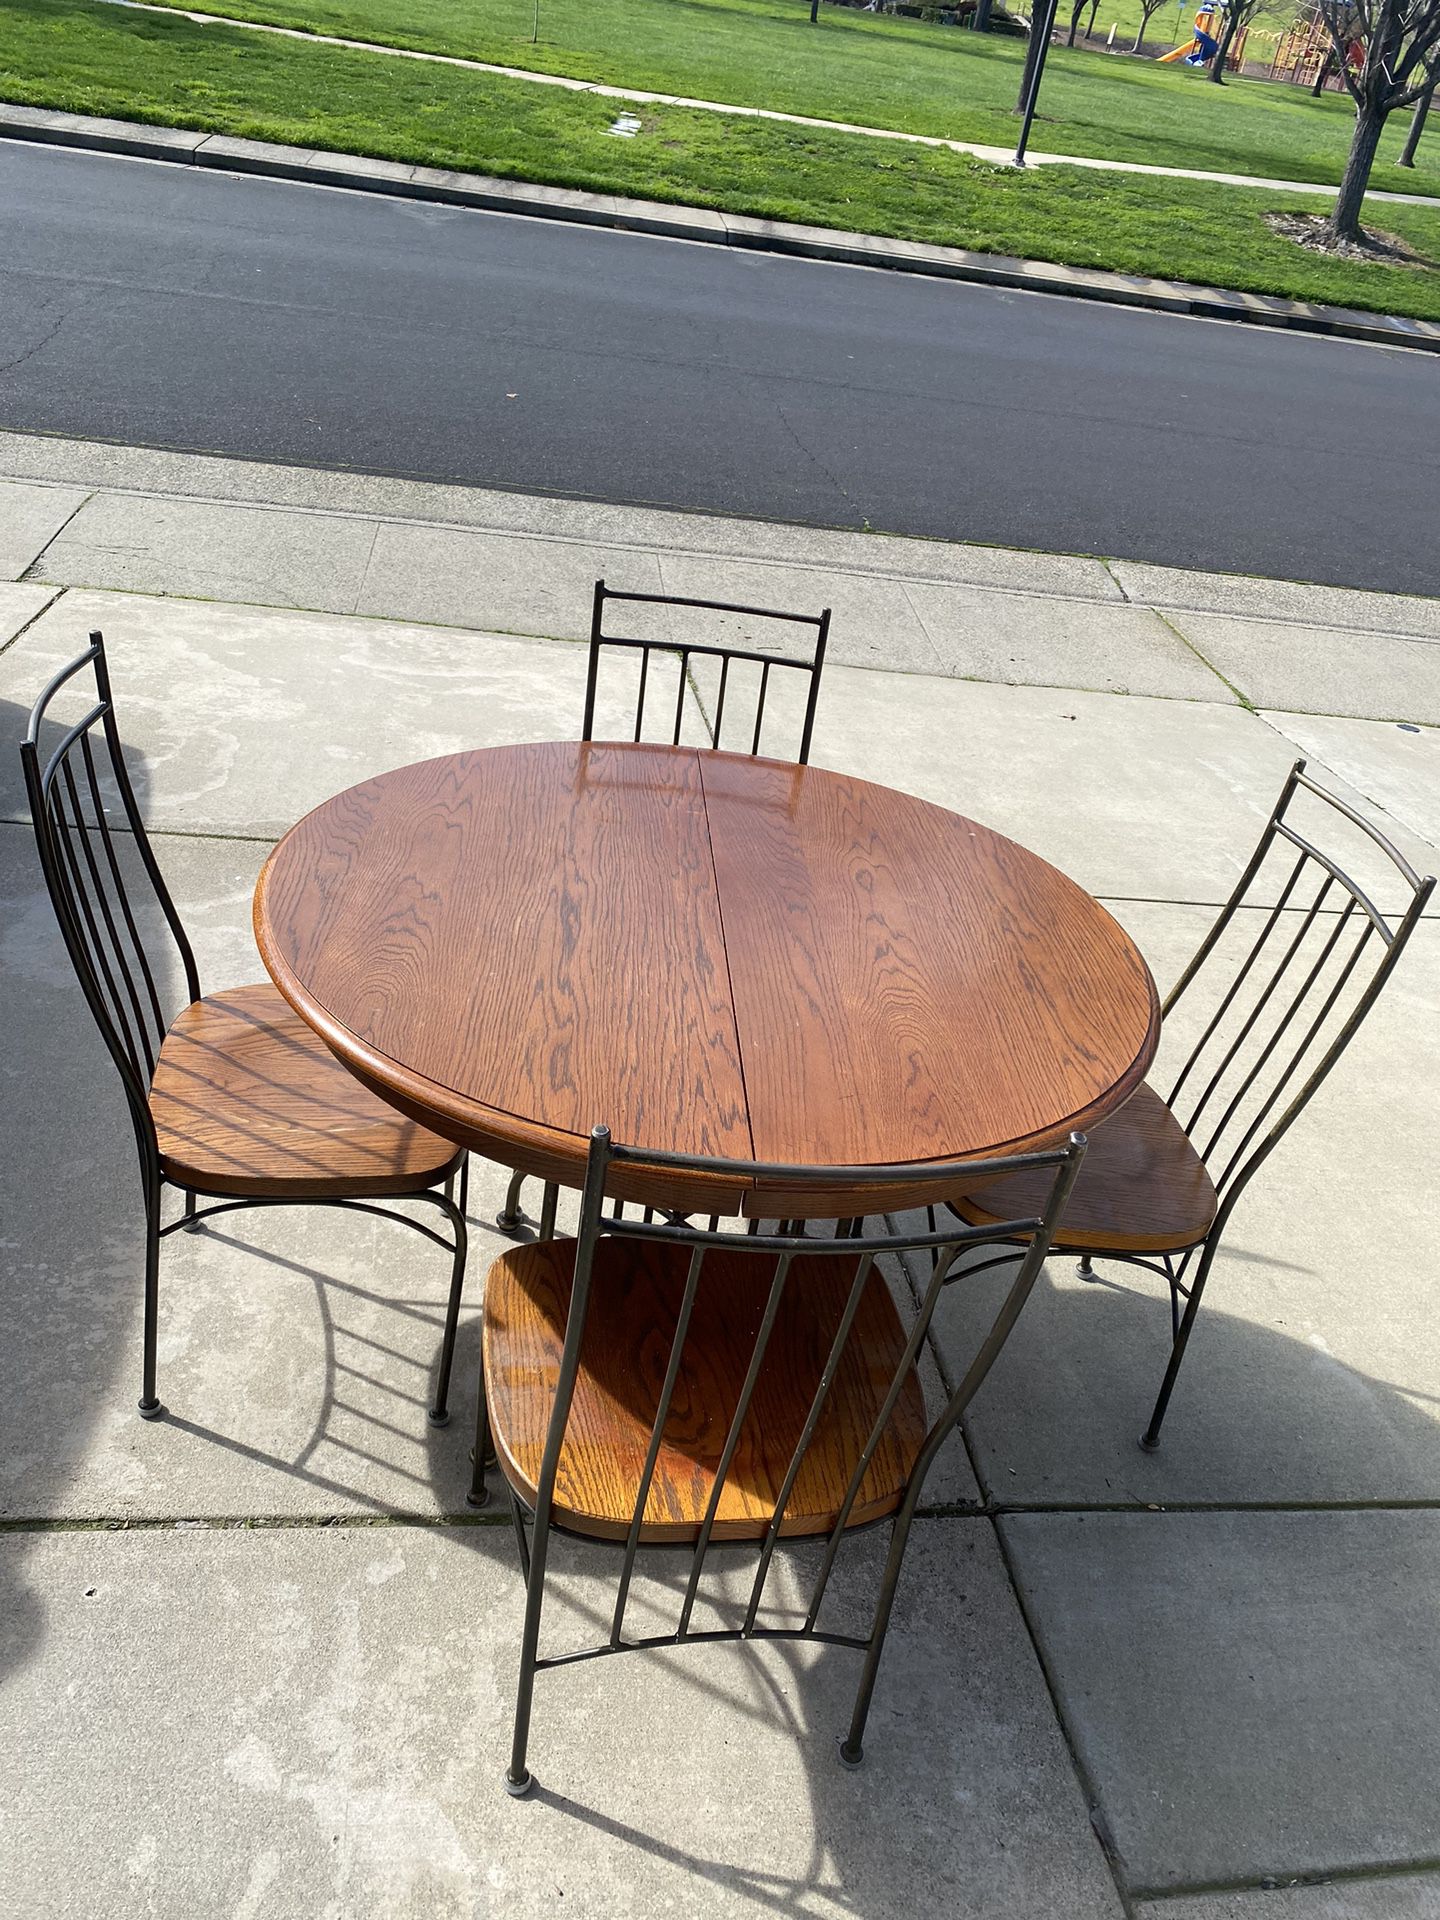 Thomasville Wrought Iron Wood Table Chairs